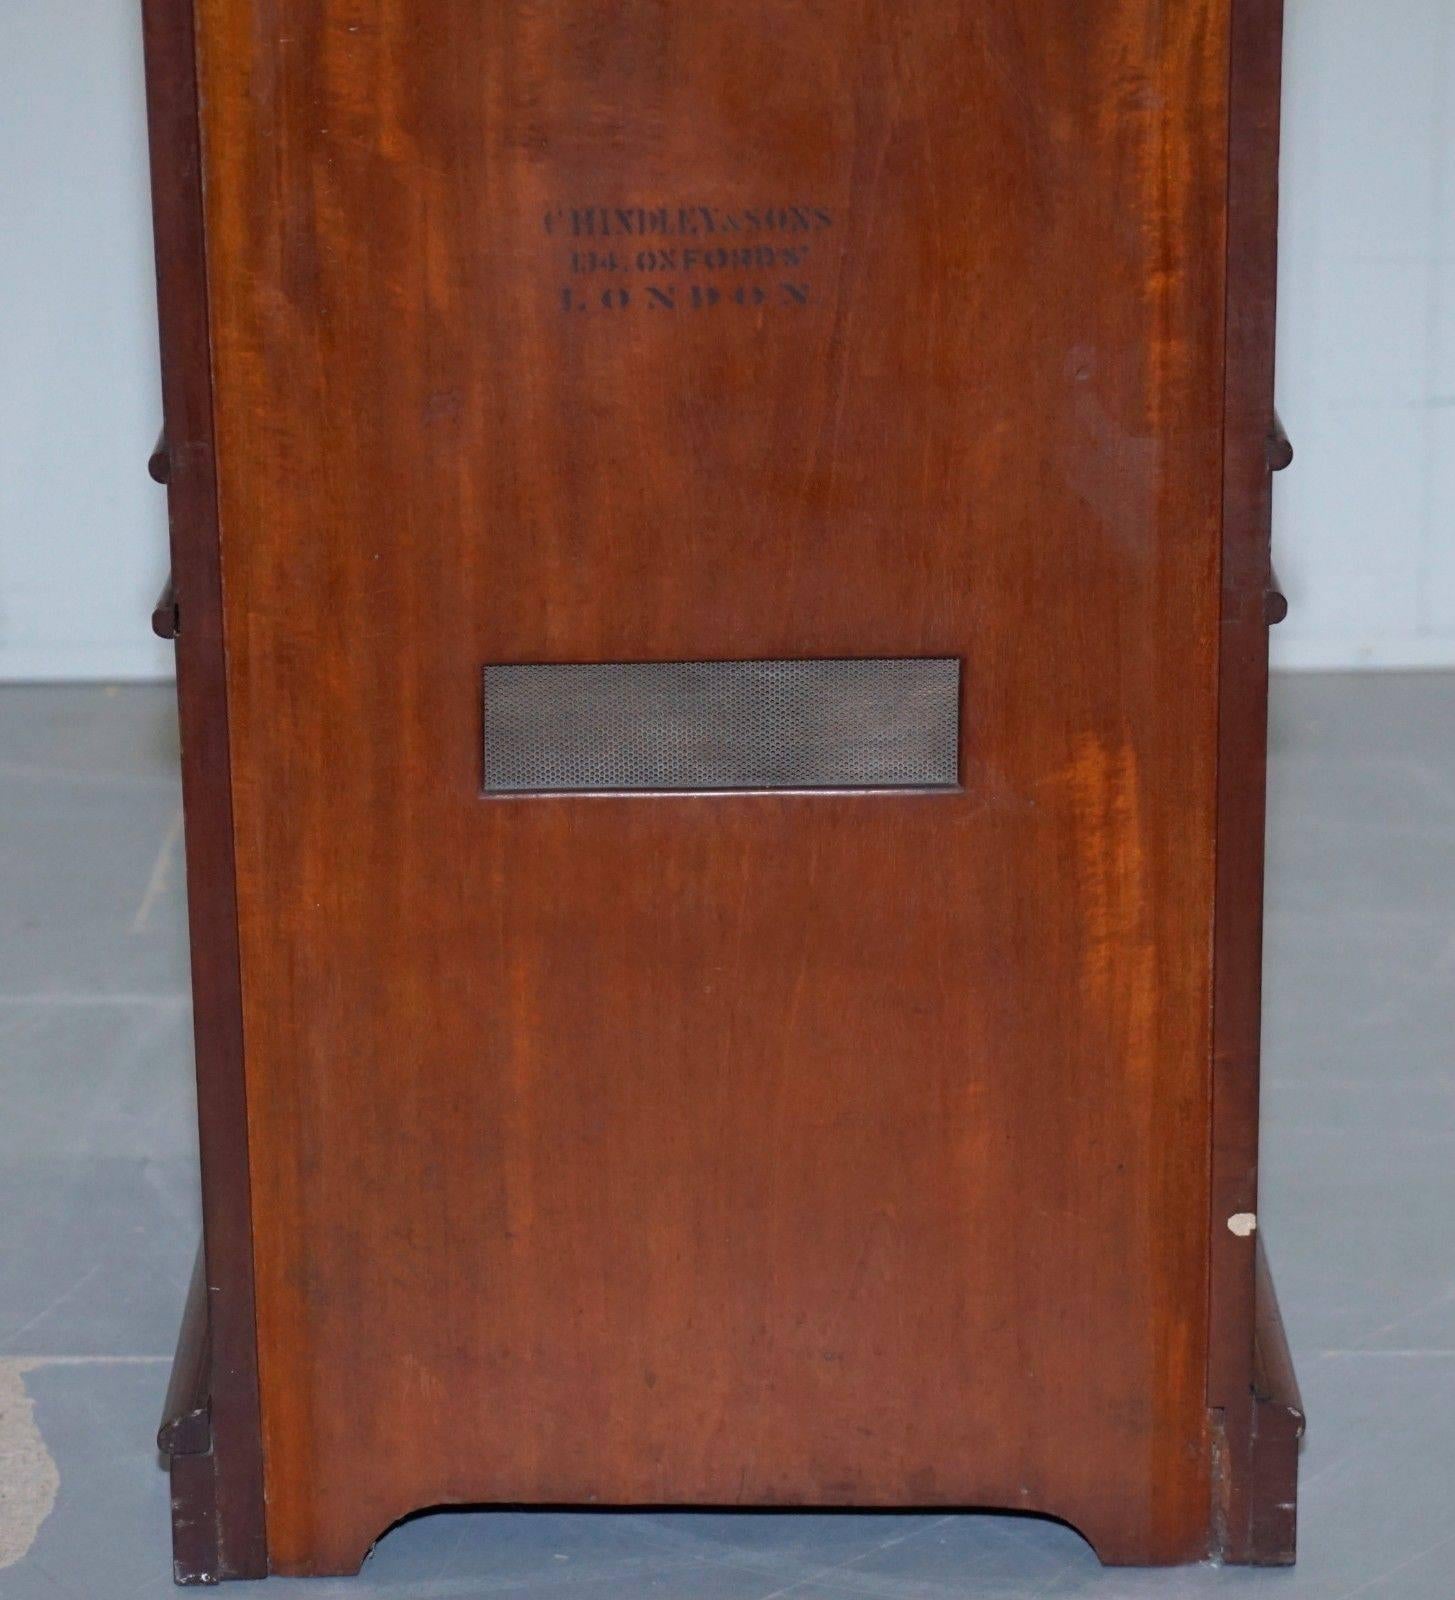 Rare C Hindley and Sons, 1766-1895 Satin Walnut Drinks Pedestal Cabinet Tambour 2